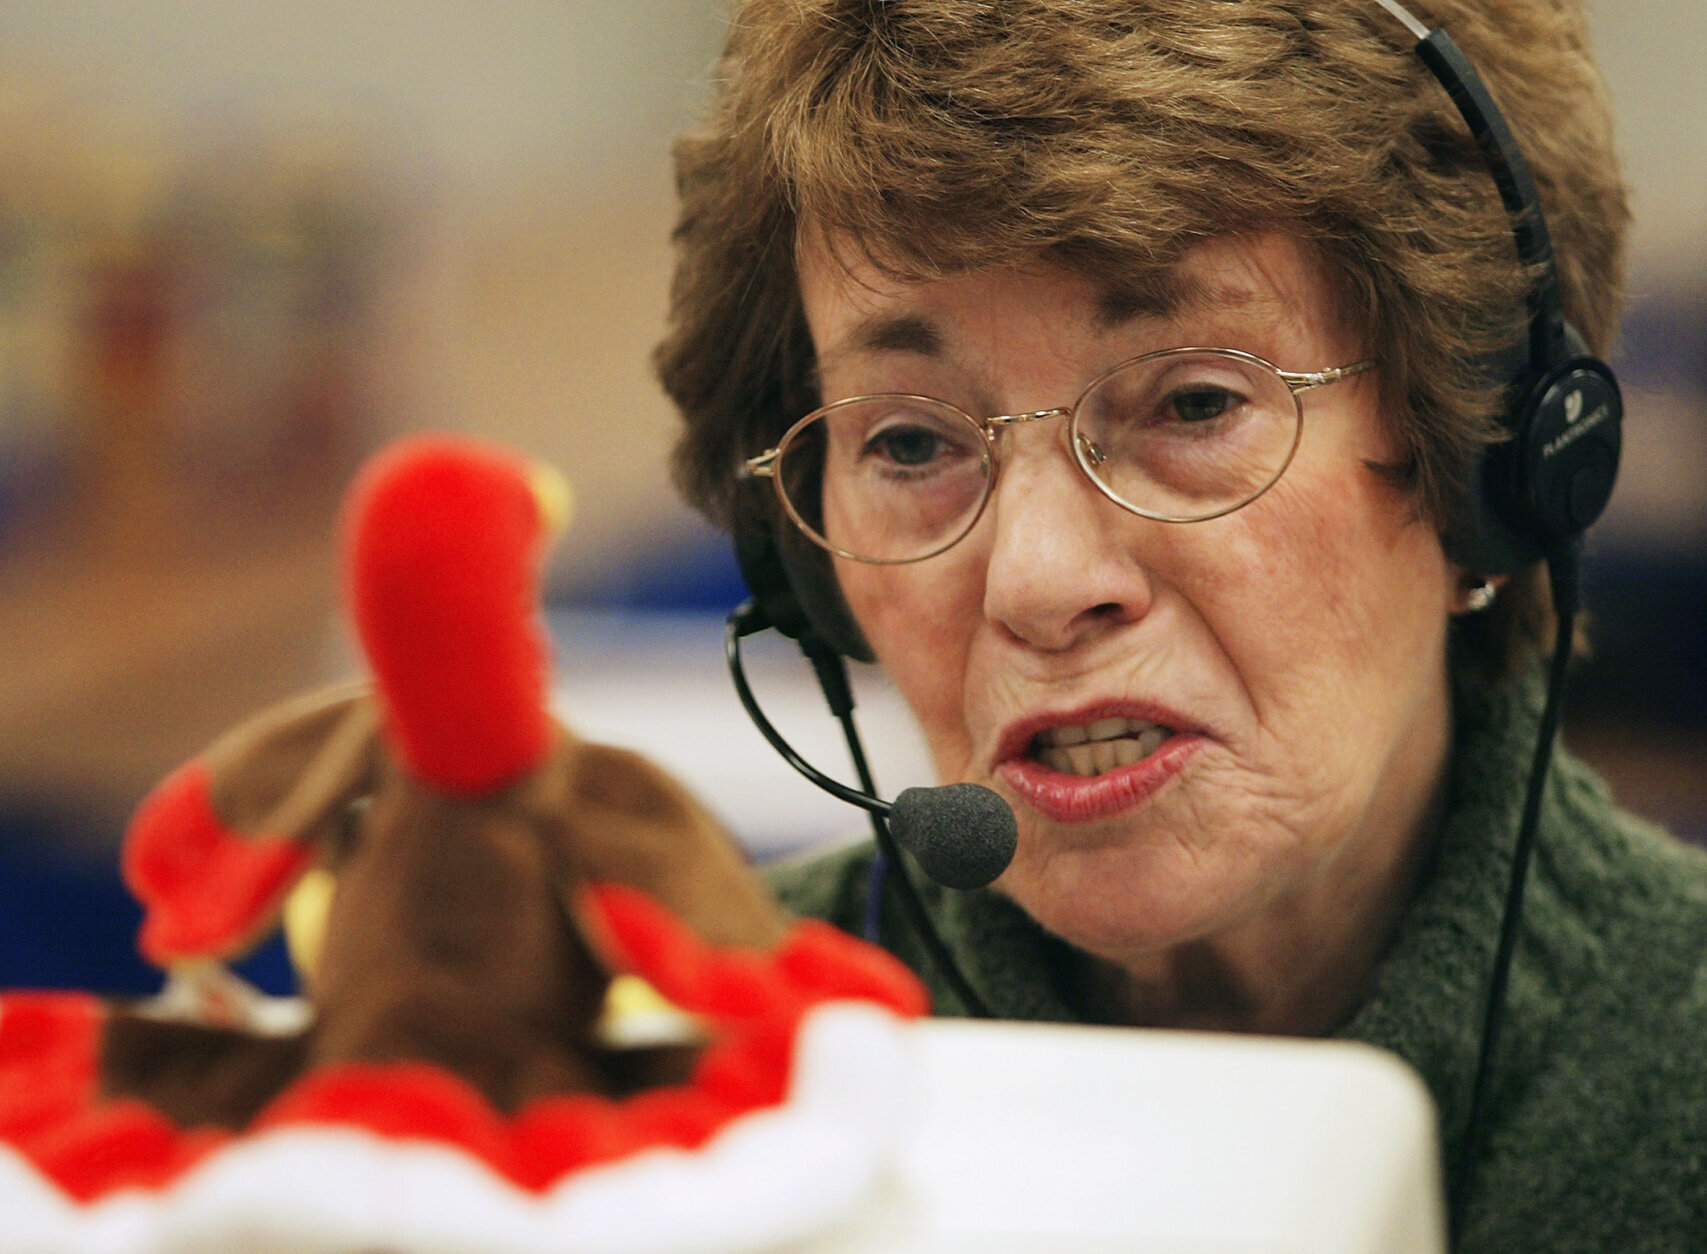 DOWNERS GROVE, IL - NOVEMBER 24: 14-year-veteran Butterball Turkey Talk-Line home economist June Rollins answers questions on her telephone headset at the Butterball Turkey Talk-Line headquarters November 24, 2003 in Downers Grove, Illinois. The Butterball Talk-Line was created to assist everyone from first-time cooks to seasoned chefs with preparing their holiday bird. Originally staffed with six home economists who responded to 11,000 phone calls in its first year alone, today the Talk-Line is staffed with nearly 50 home economists and nutritionists who respond to more than 100,000 questions each November and December. ConAgra Foods opened the Butterball Turkey Talk-Line in 1981. (Photo by Tim Boyle/Getty Images)